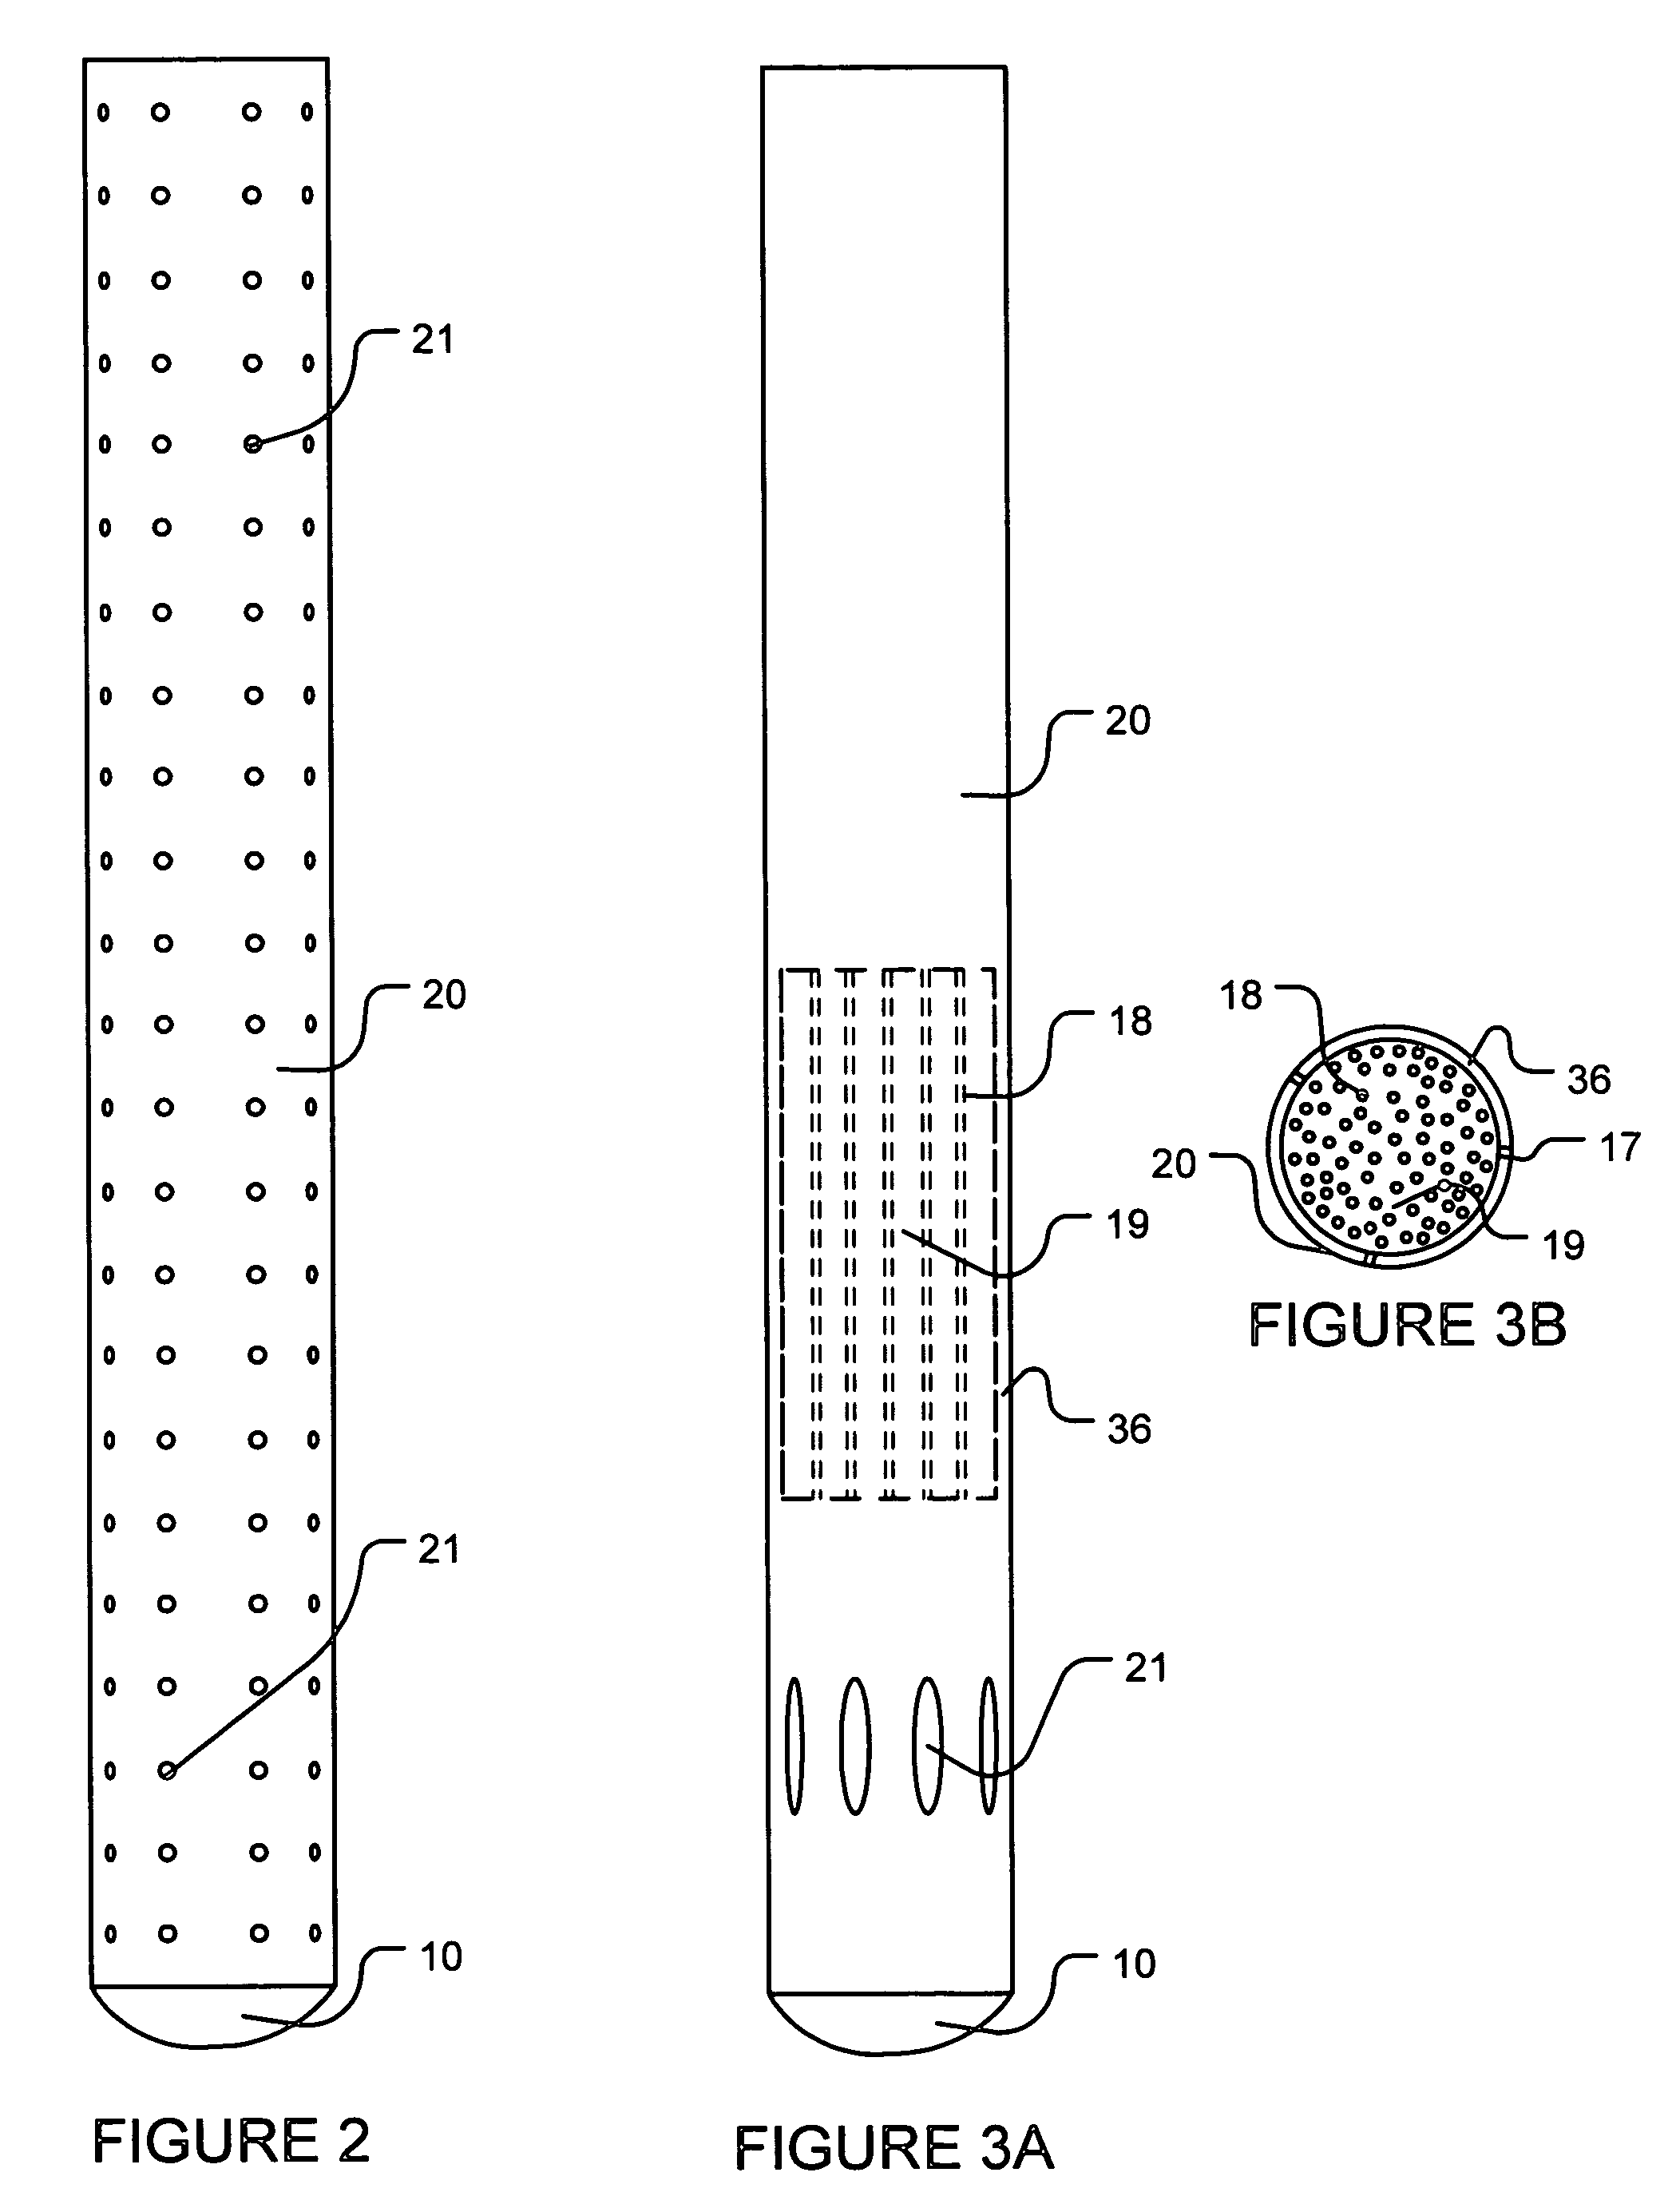 Casing shoes and methods of reverse-circulation cementing of casing